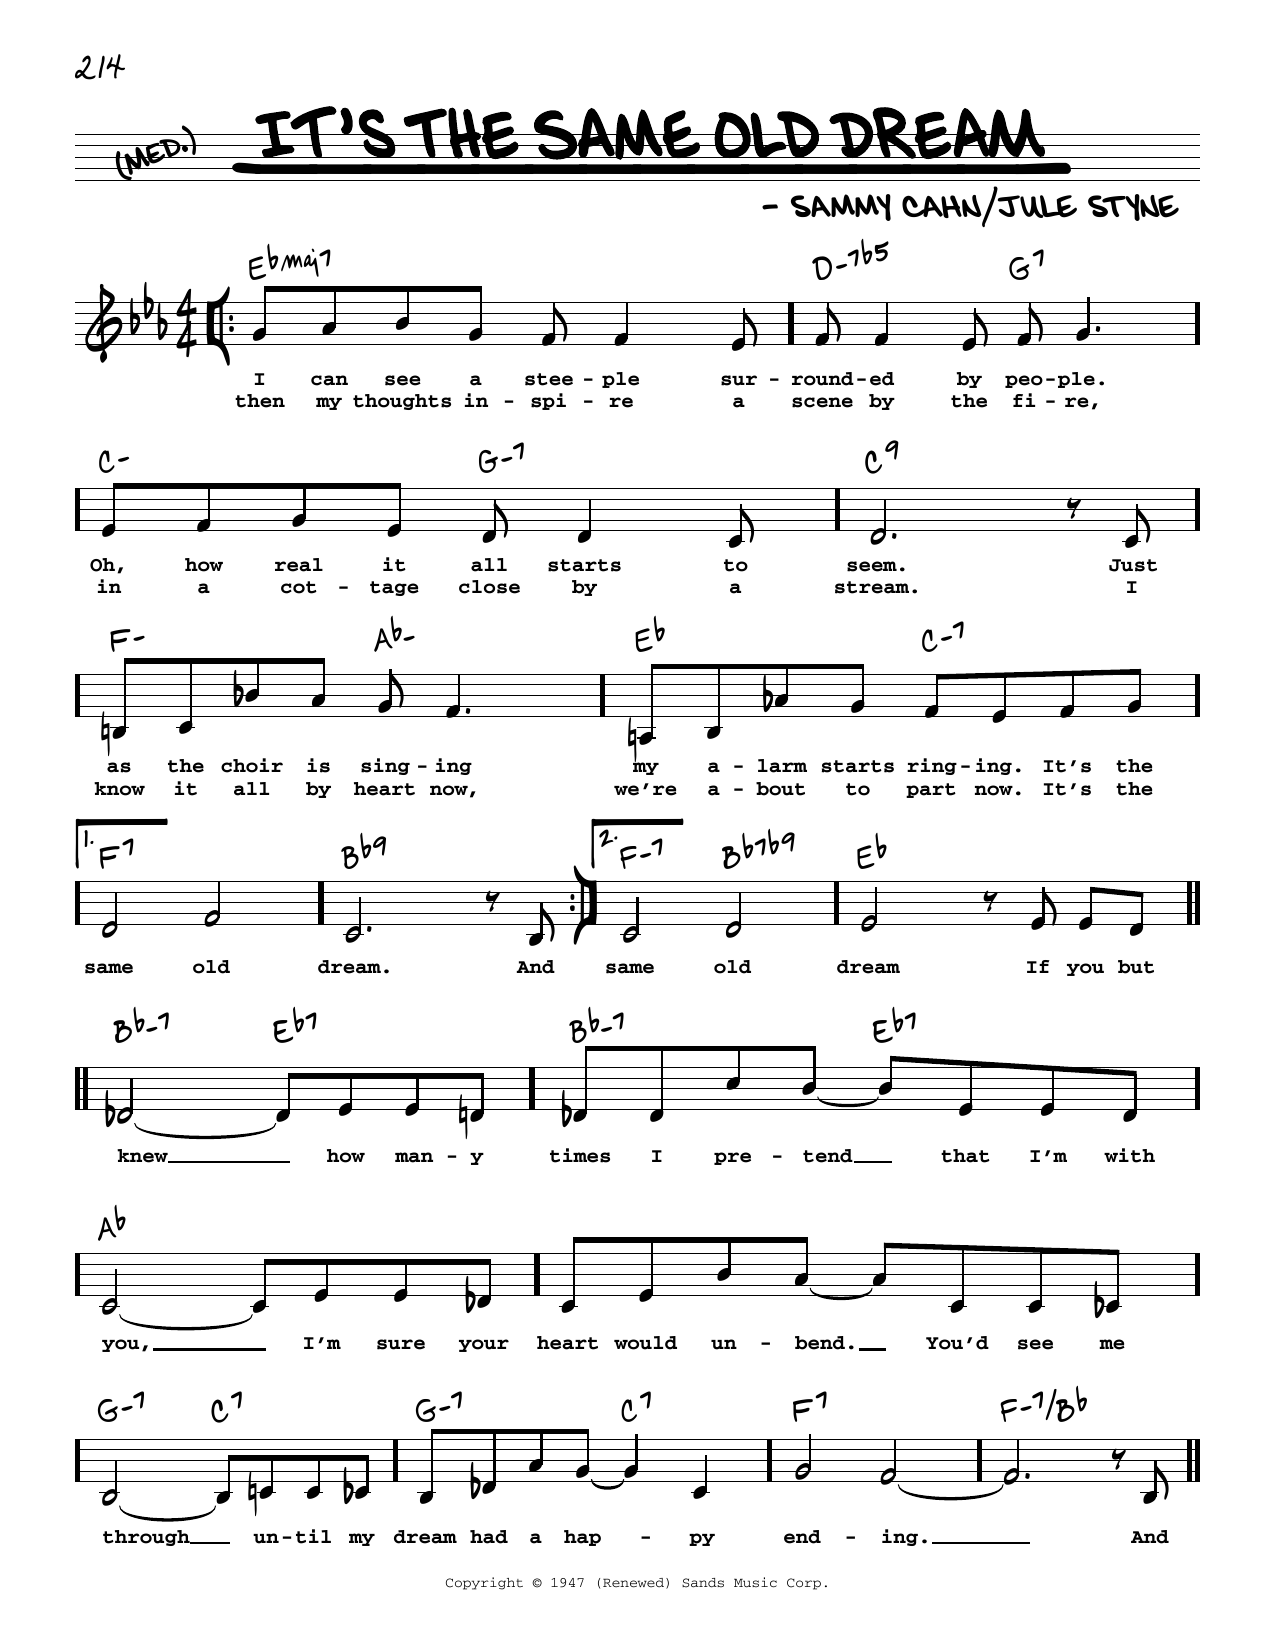 Download Jule Styne It's The Same Old Dream (Low Voice) Sheet Music